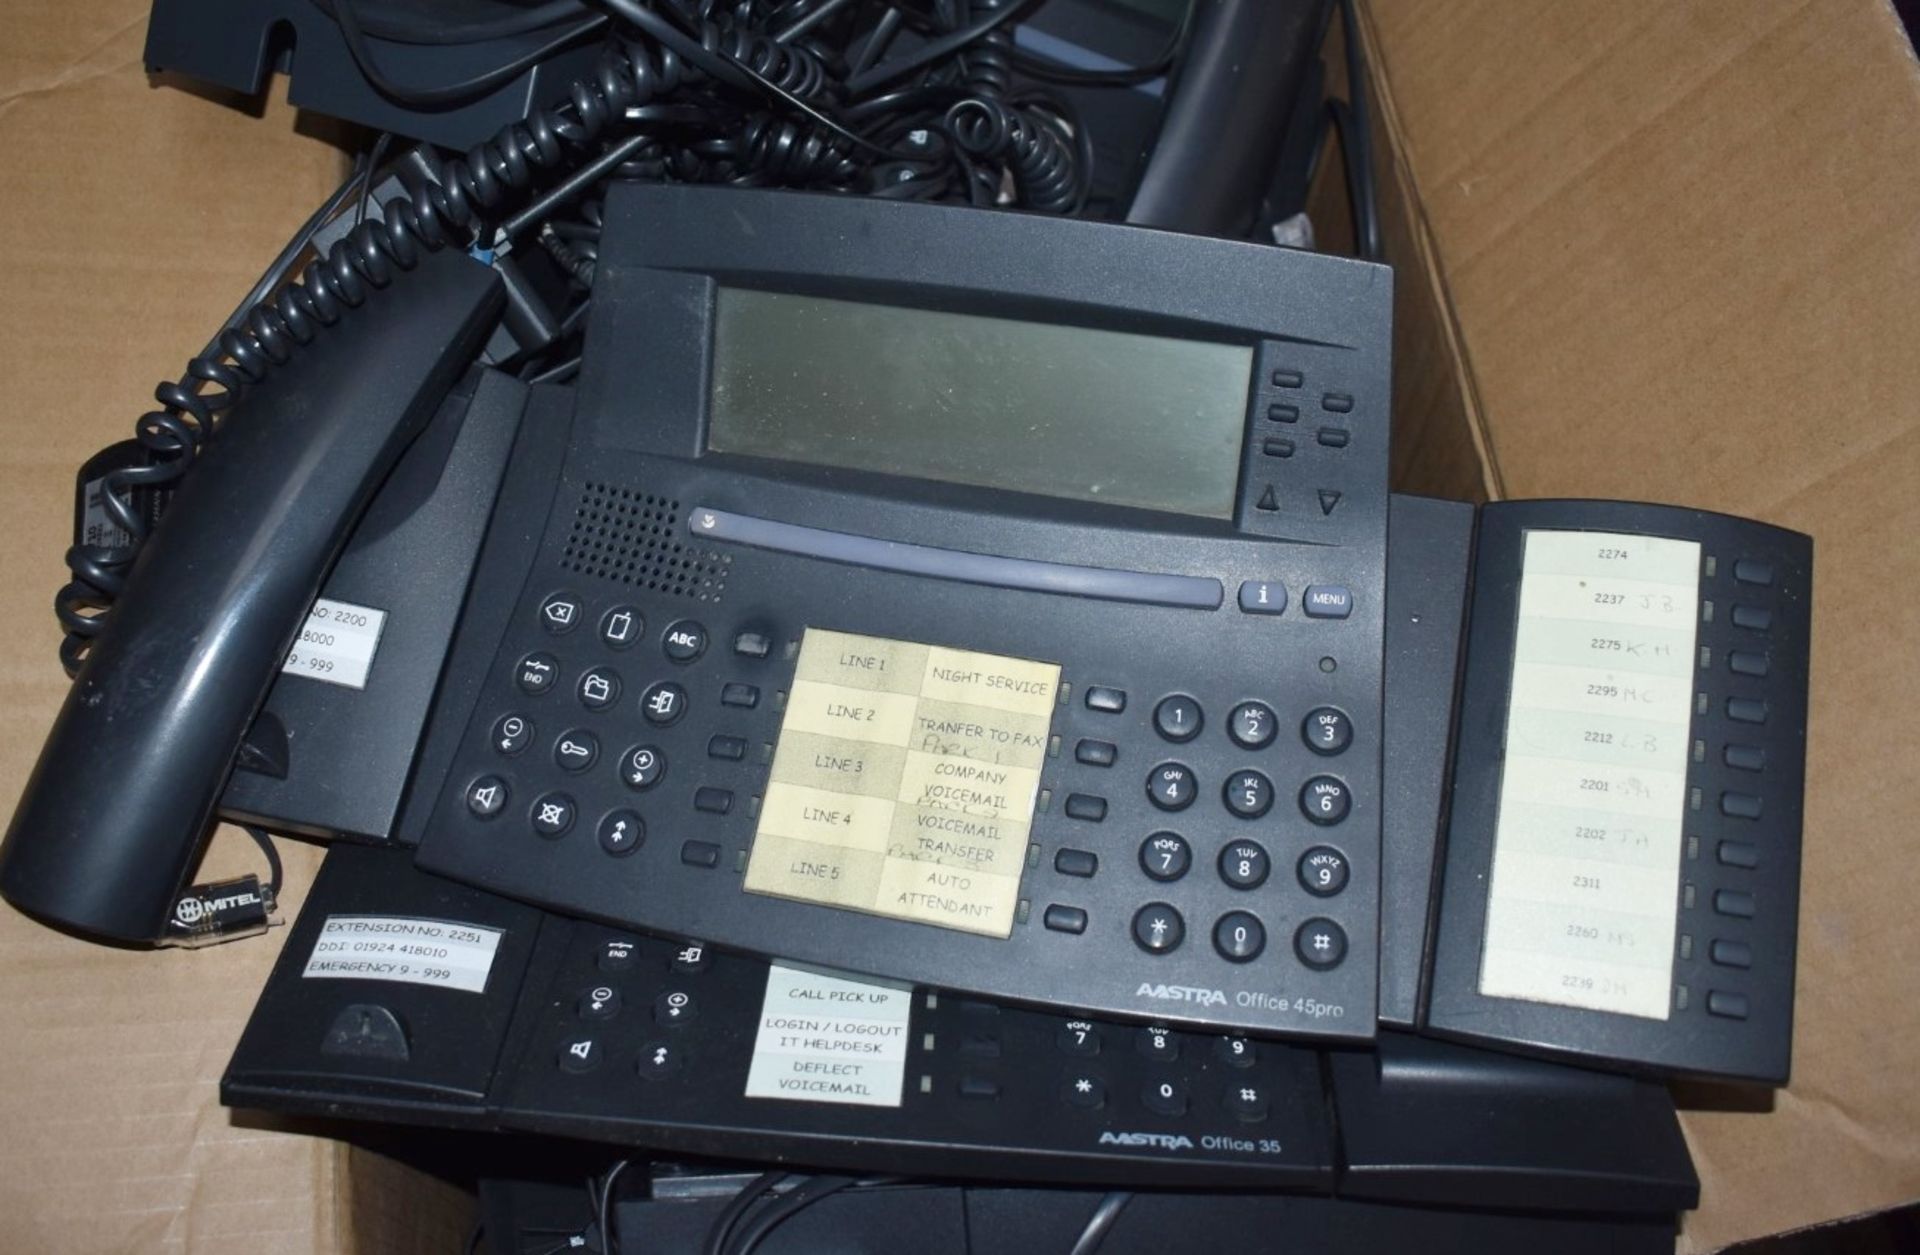 22 x Astra Office Telephones - Various Models Included - Removed From a Working Office Environment - Image 4 of 7